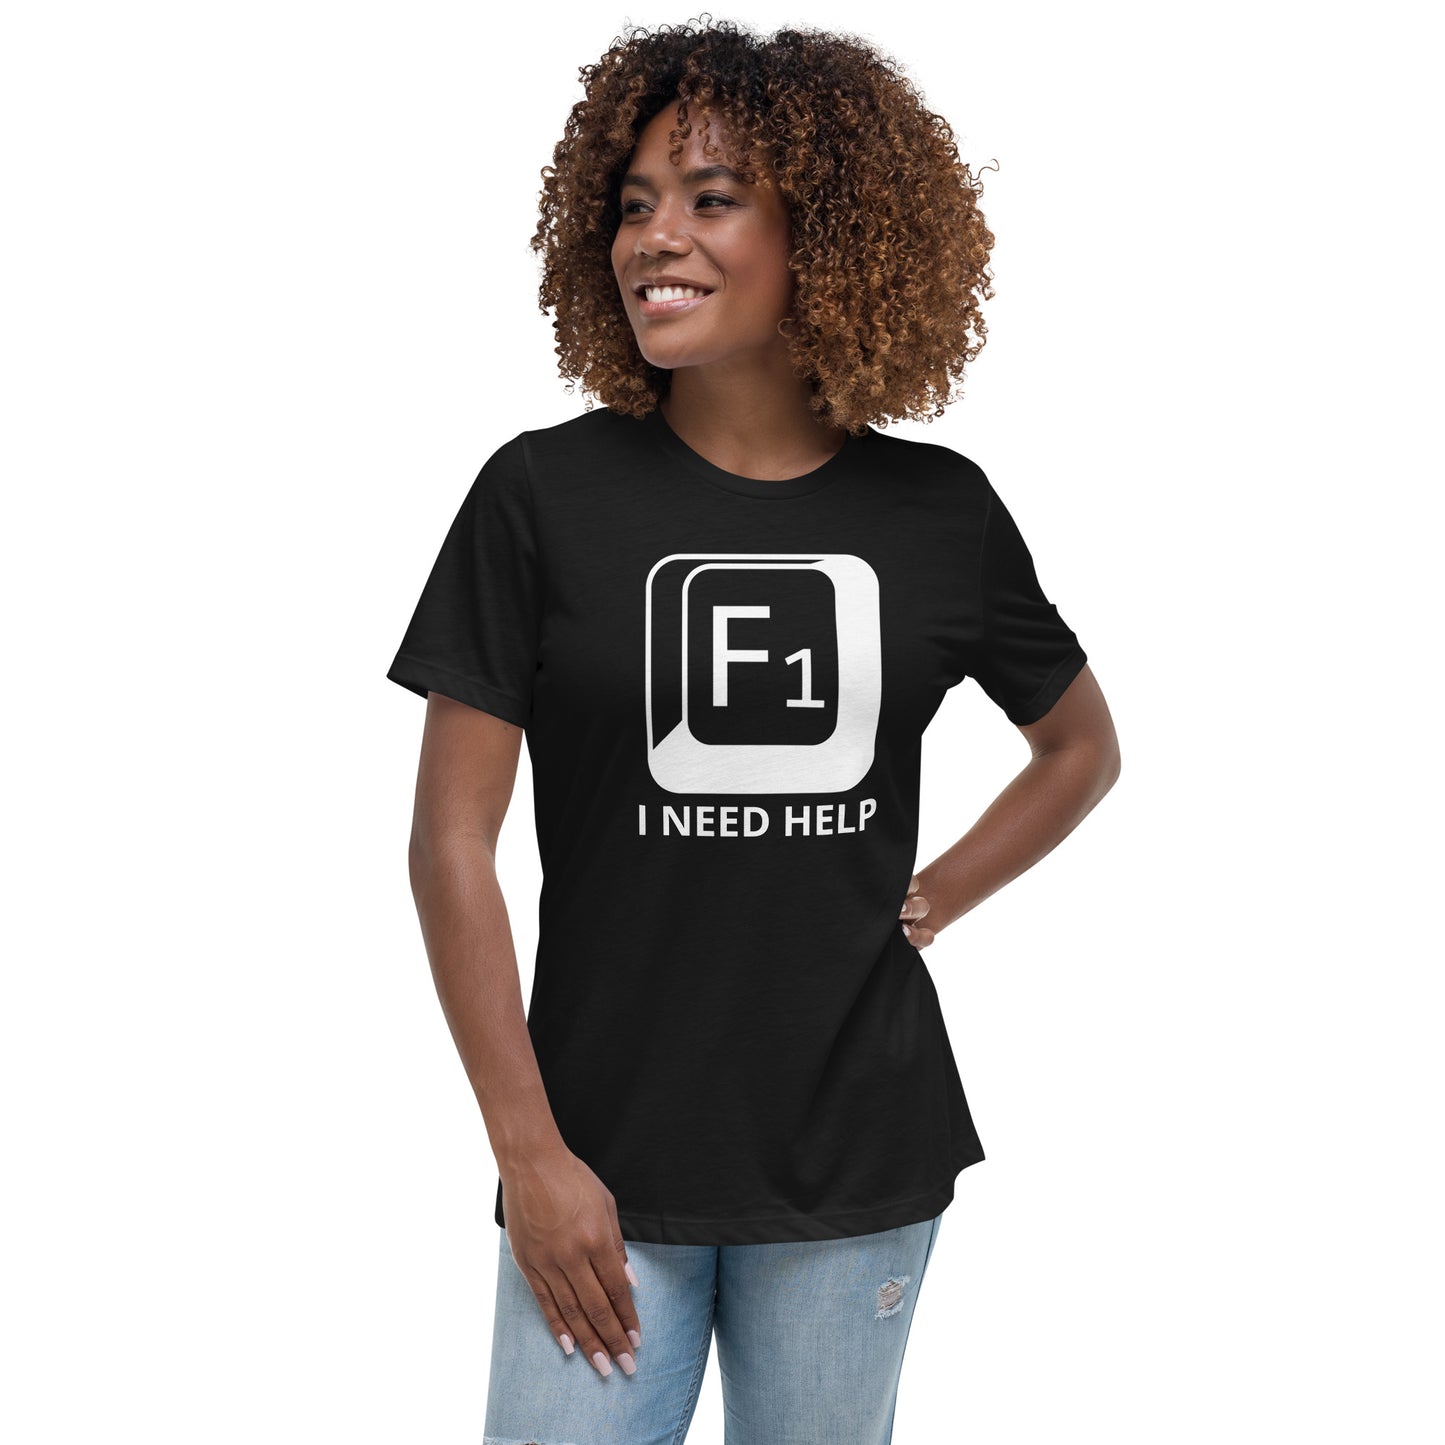 Woman with black t-shirt with picture of "F1" key and text "I need help"